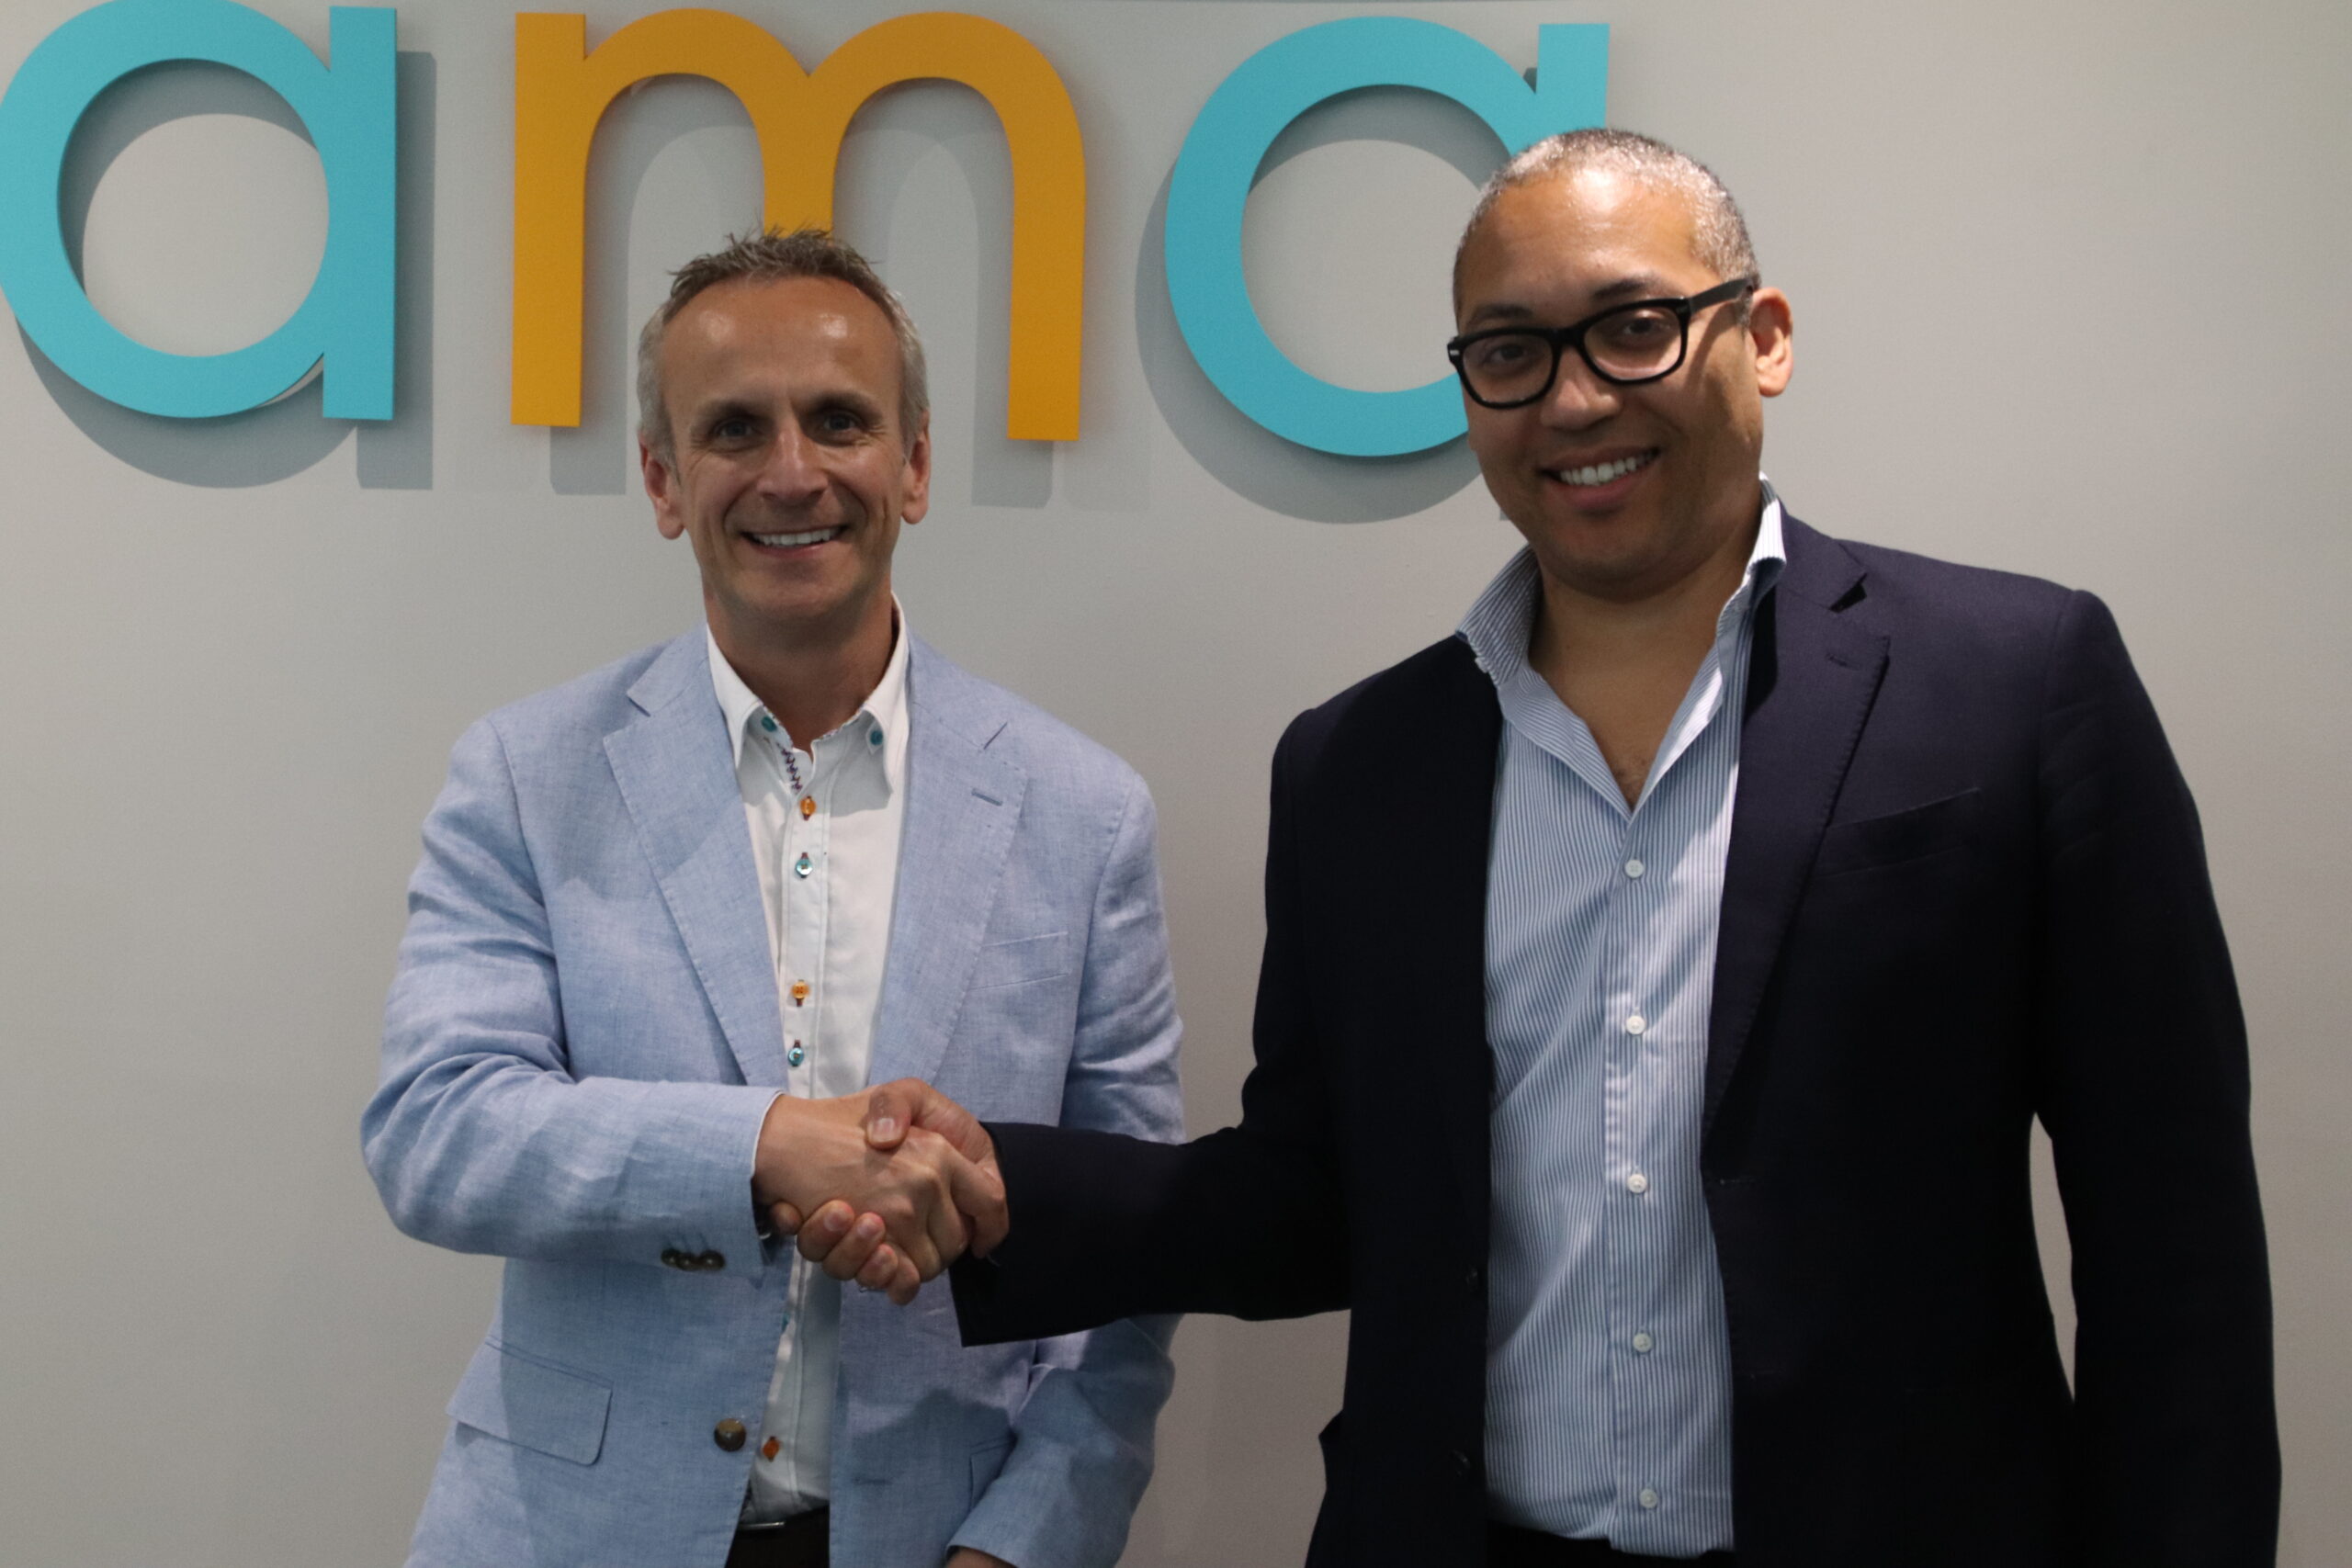 Jaama Managing Director, Martin Evans and Chief Executive, Andrew Holgate